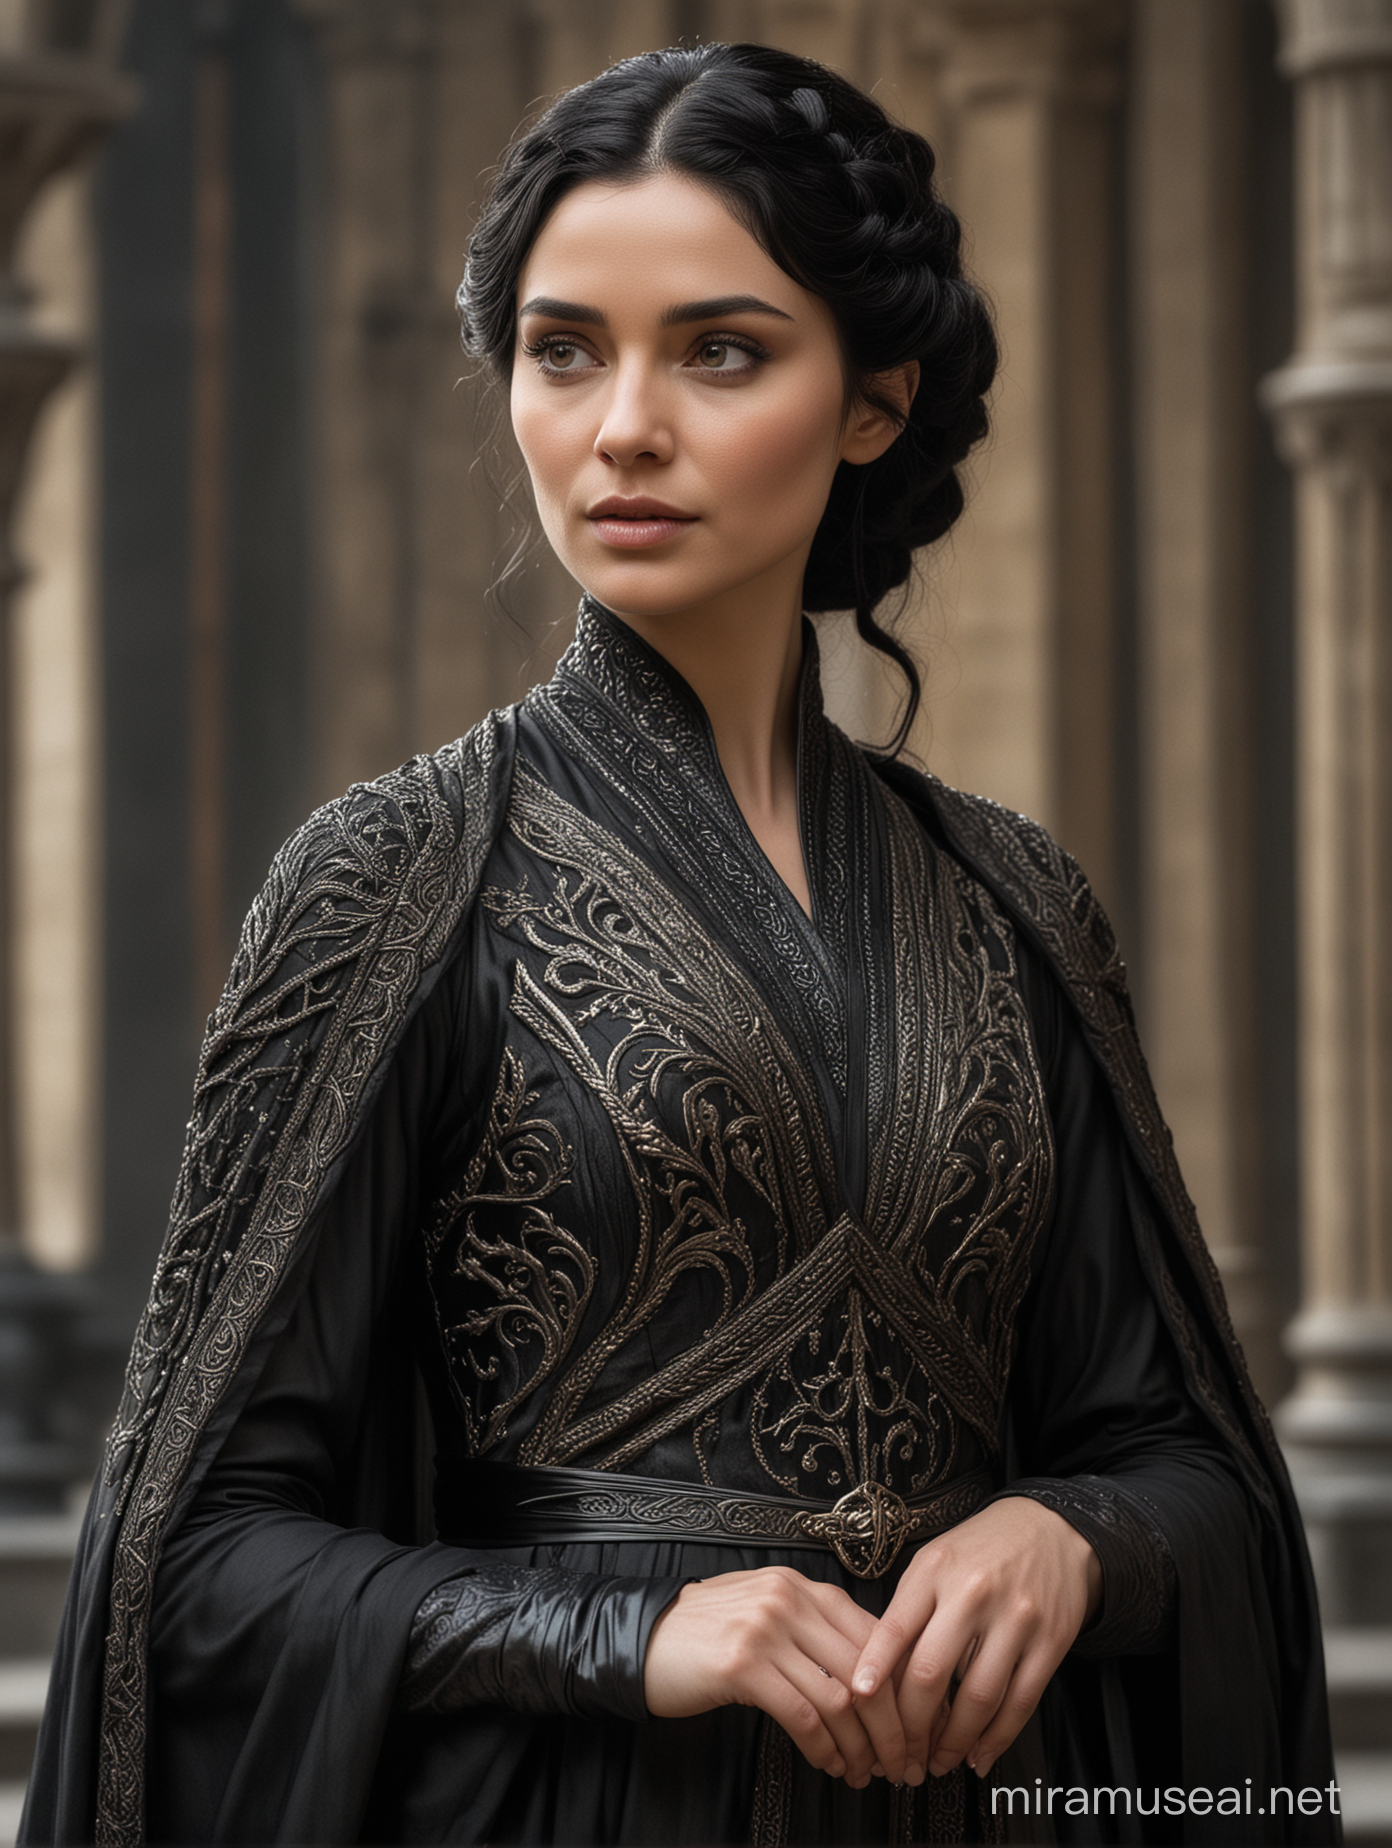 Valyrian Woman,valyrian style black hair,cured skin,black imperial gown